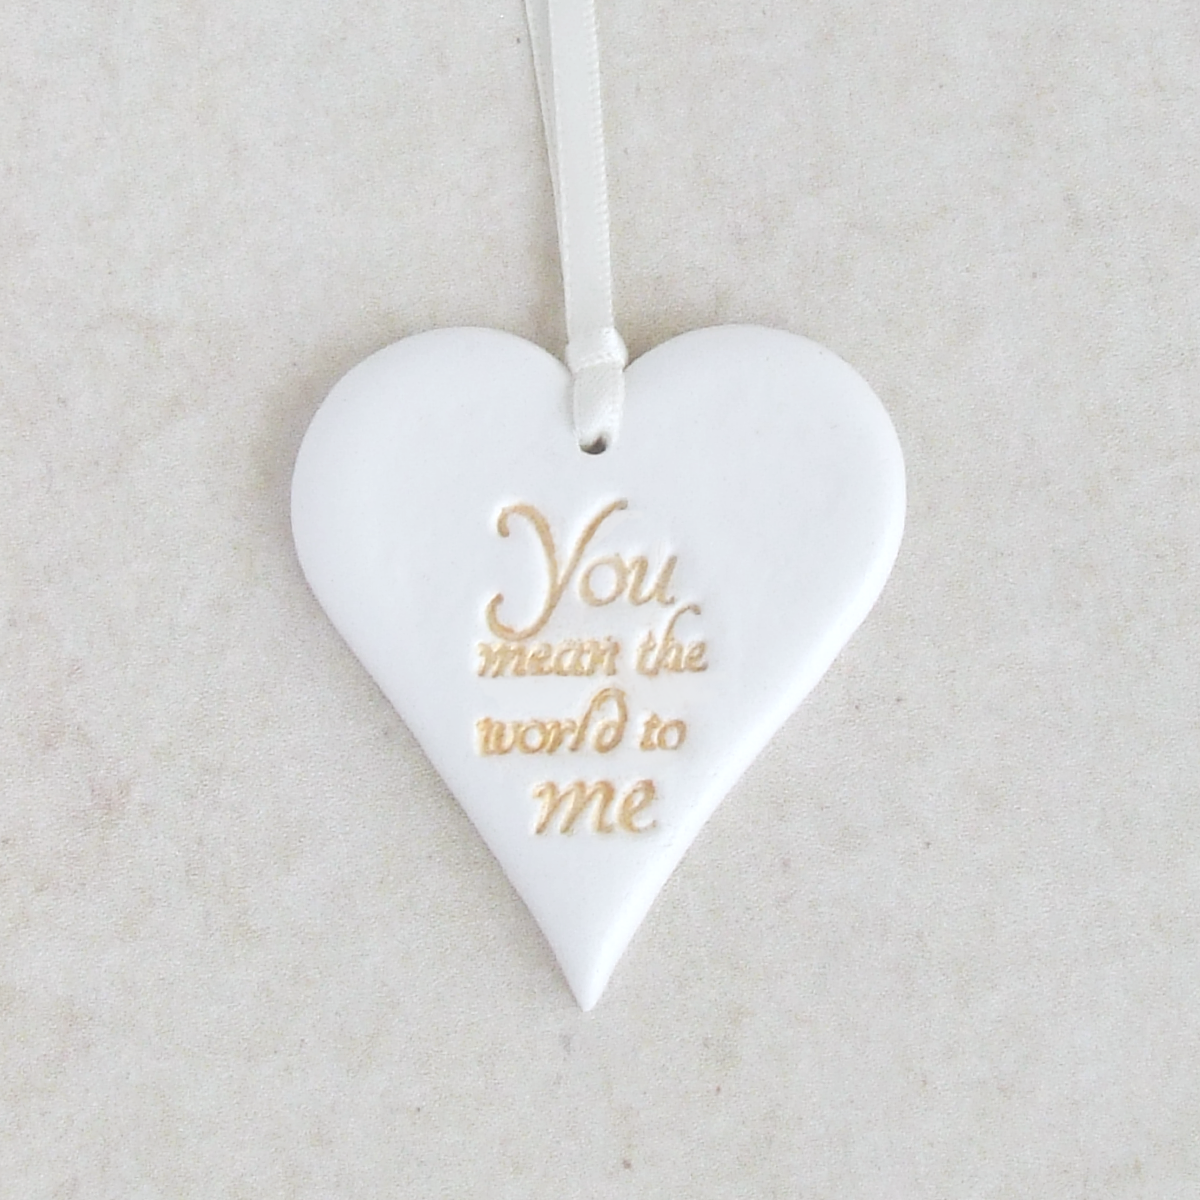 Heart shaped hanging ornament made from white clay with gold worlds 'You mean the world to me' 